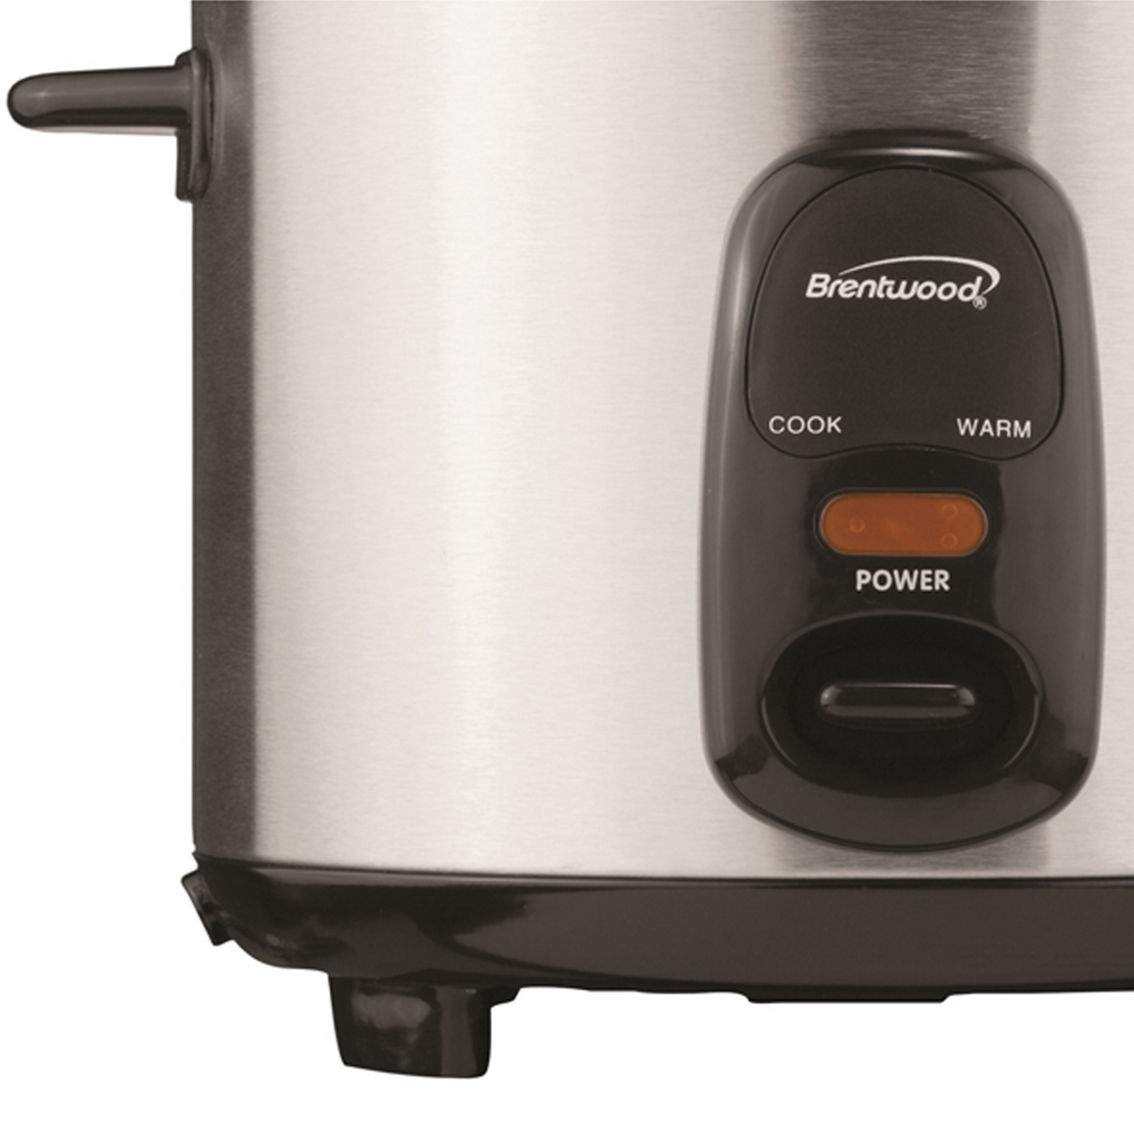 Brentwood Stainless Steel 5 Cup Rice Cooker - Image 4 of 7